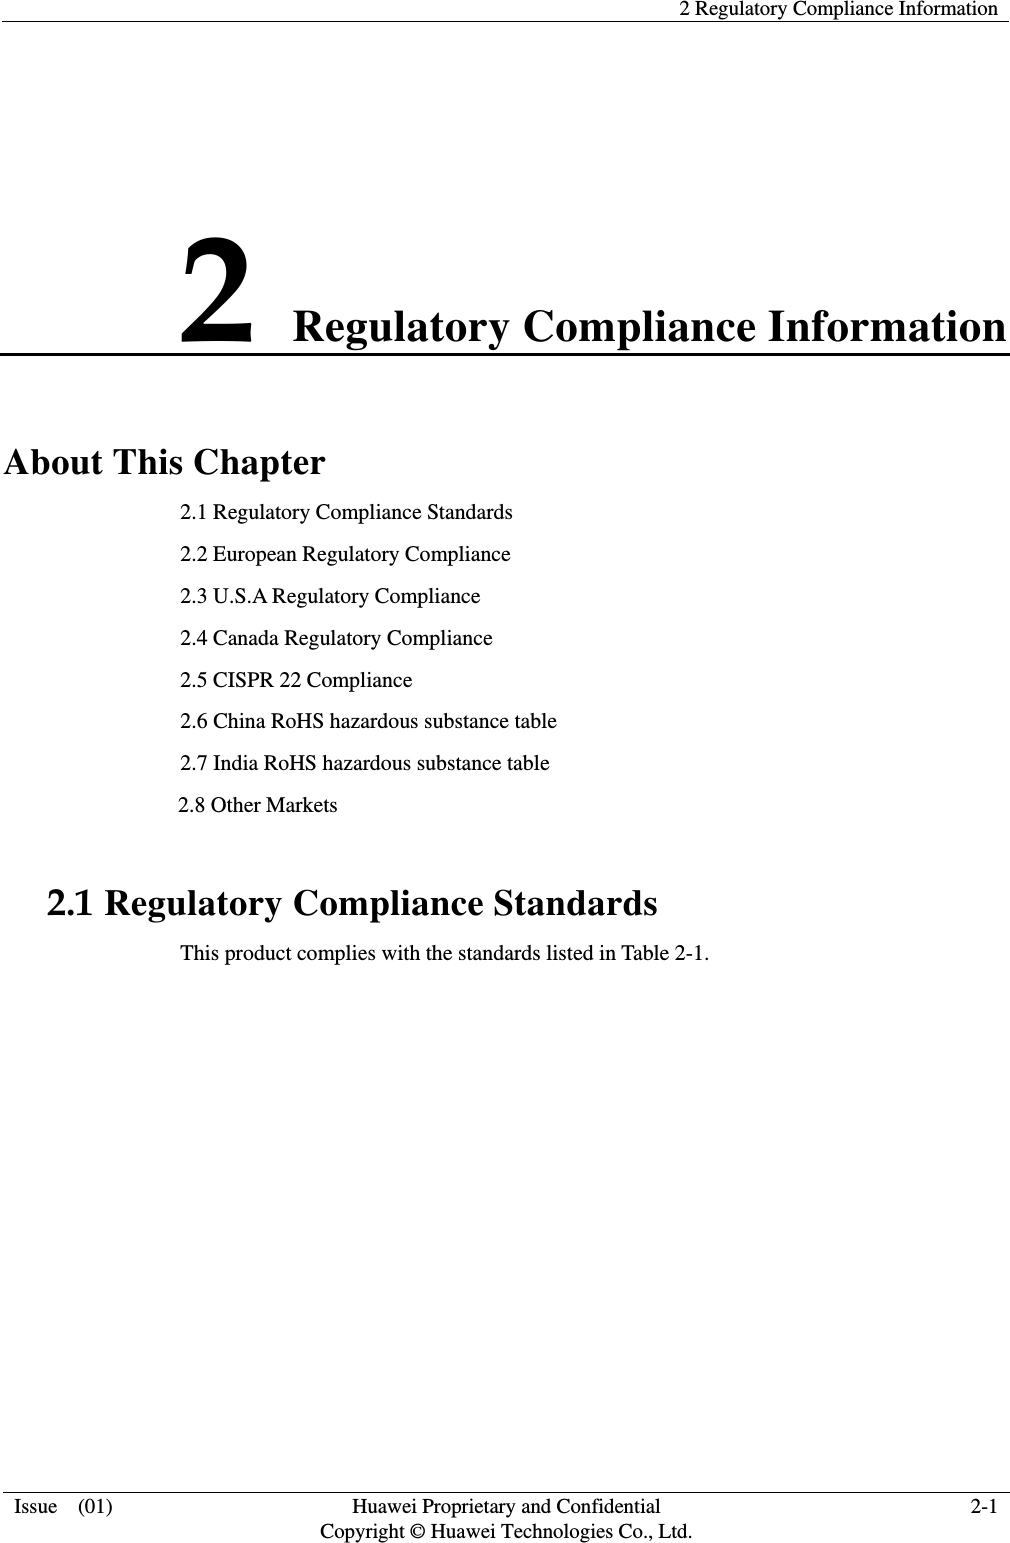    2 Regulatory Compliance Information Issue  (01)  Huawei Proprietary and Confidential     Copyright © Huawei Technologies Co., Ltd. 2-1 2 Regulatory Compliance Information About This Chapter 2.1 Regulatory Compliance Standards 2.2 European Regulatory Compliance 2.3 U.S.A Regulatory Compliance 2.4 Canada Regulatory Compliance   2.5 CISPR 22 Compliance             2.6 China RoHS hazardous substance table 2.7 India RoHS hazardous substance table 2.8 Other Markets 2.1 Regulatory Compliance Standards This product complies with the standards listed in Table 2-1. 